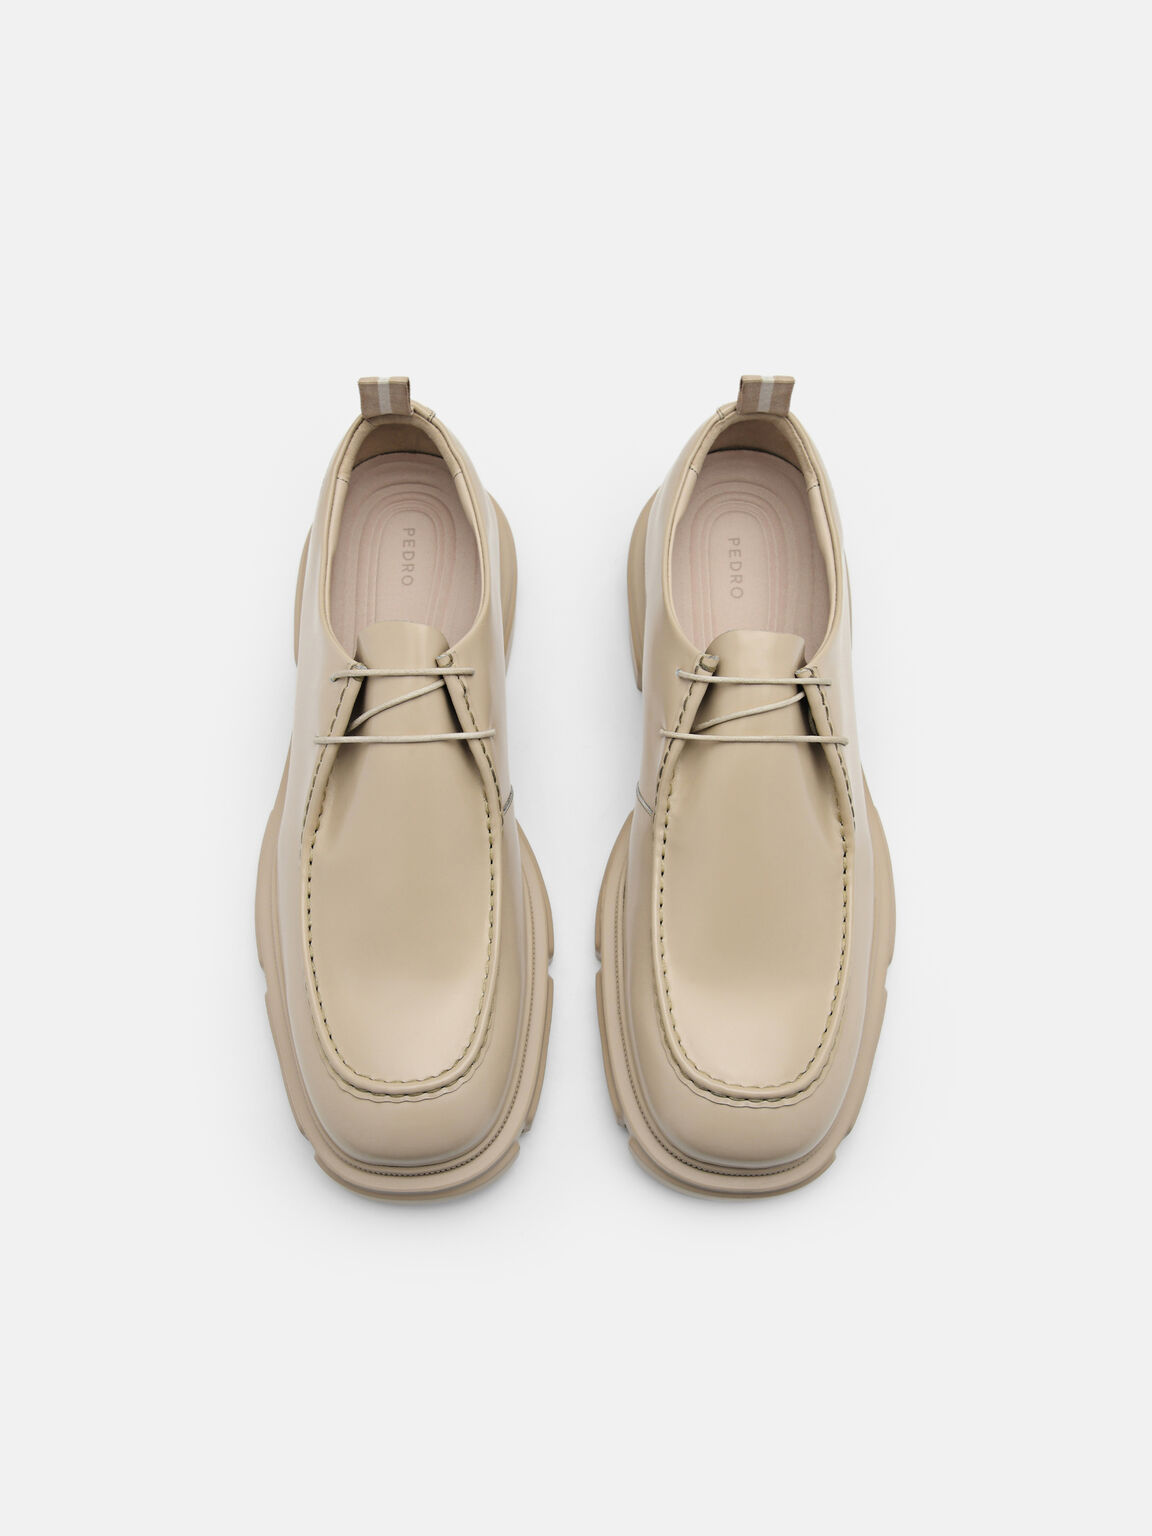 Ellis Leather Lace-up Shoes, Taupe